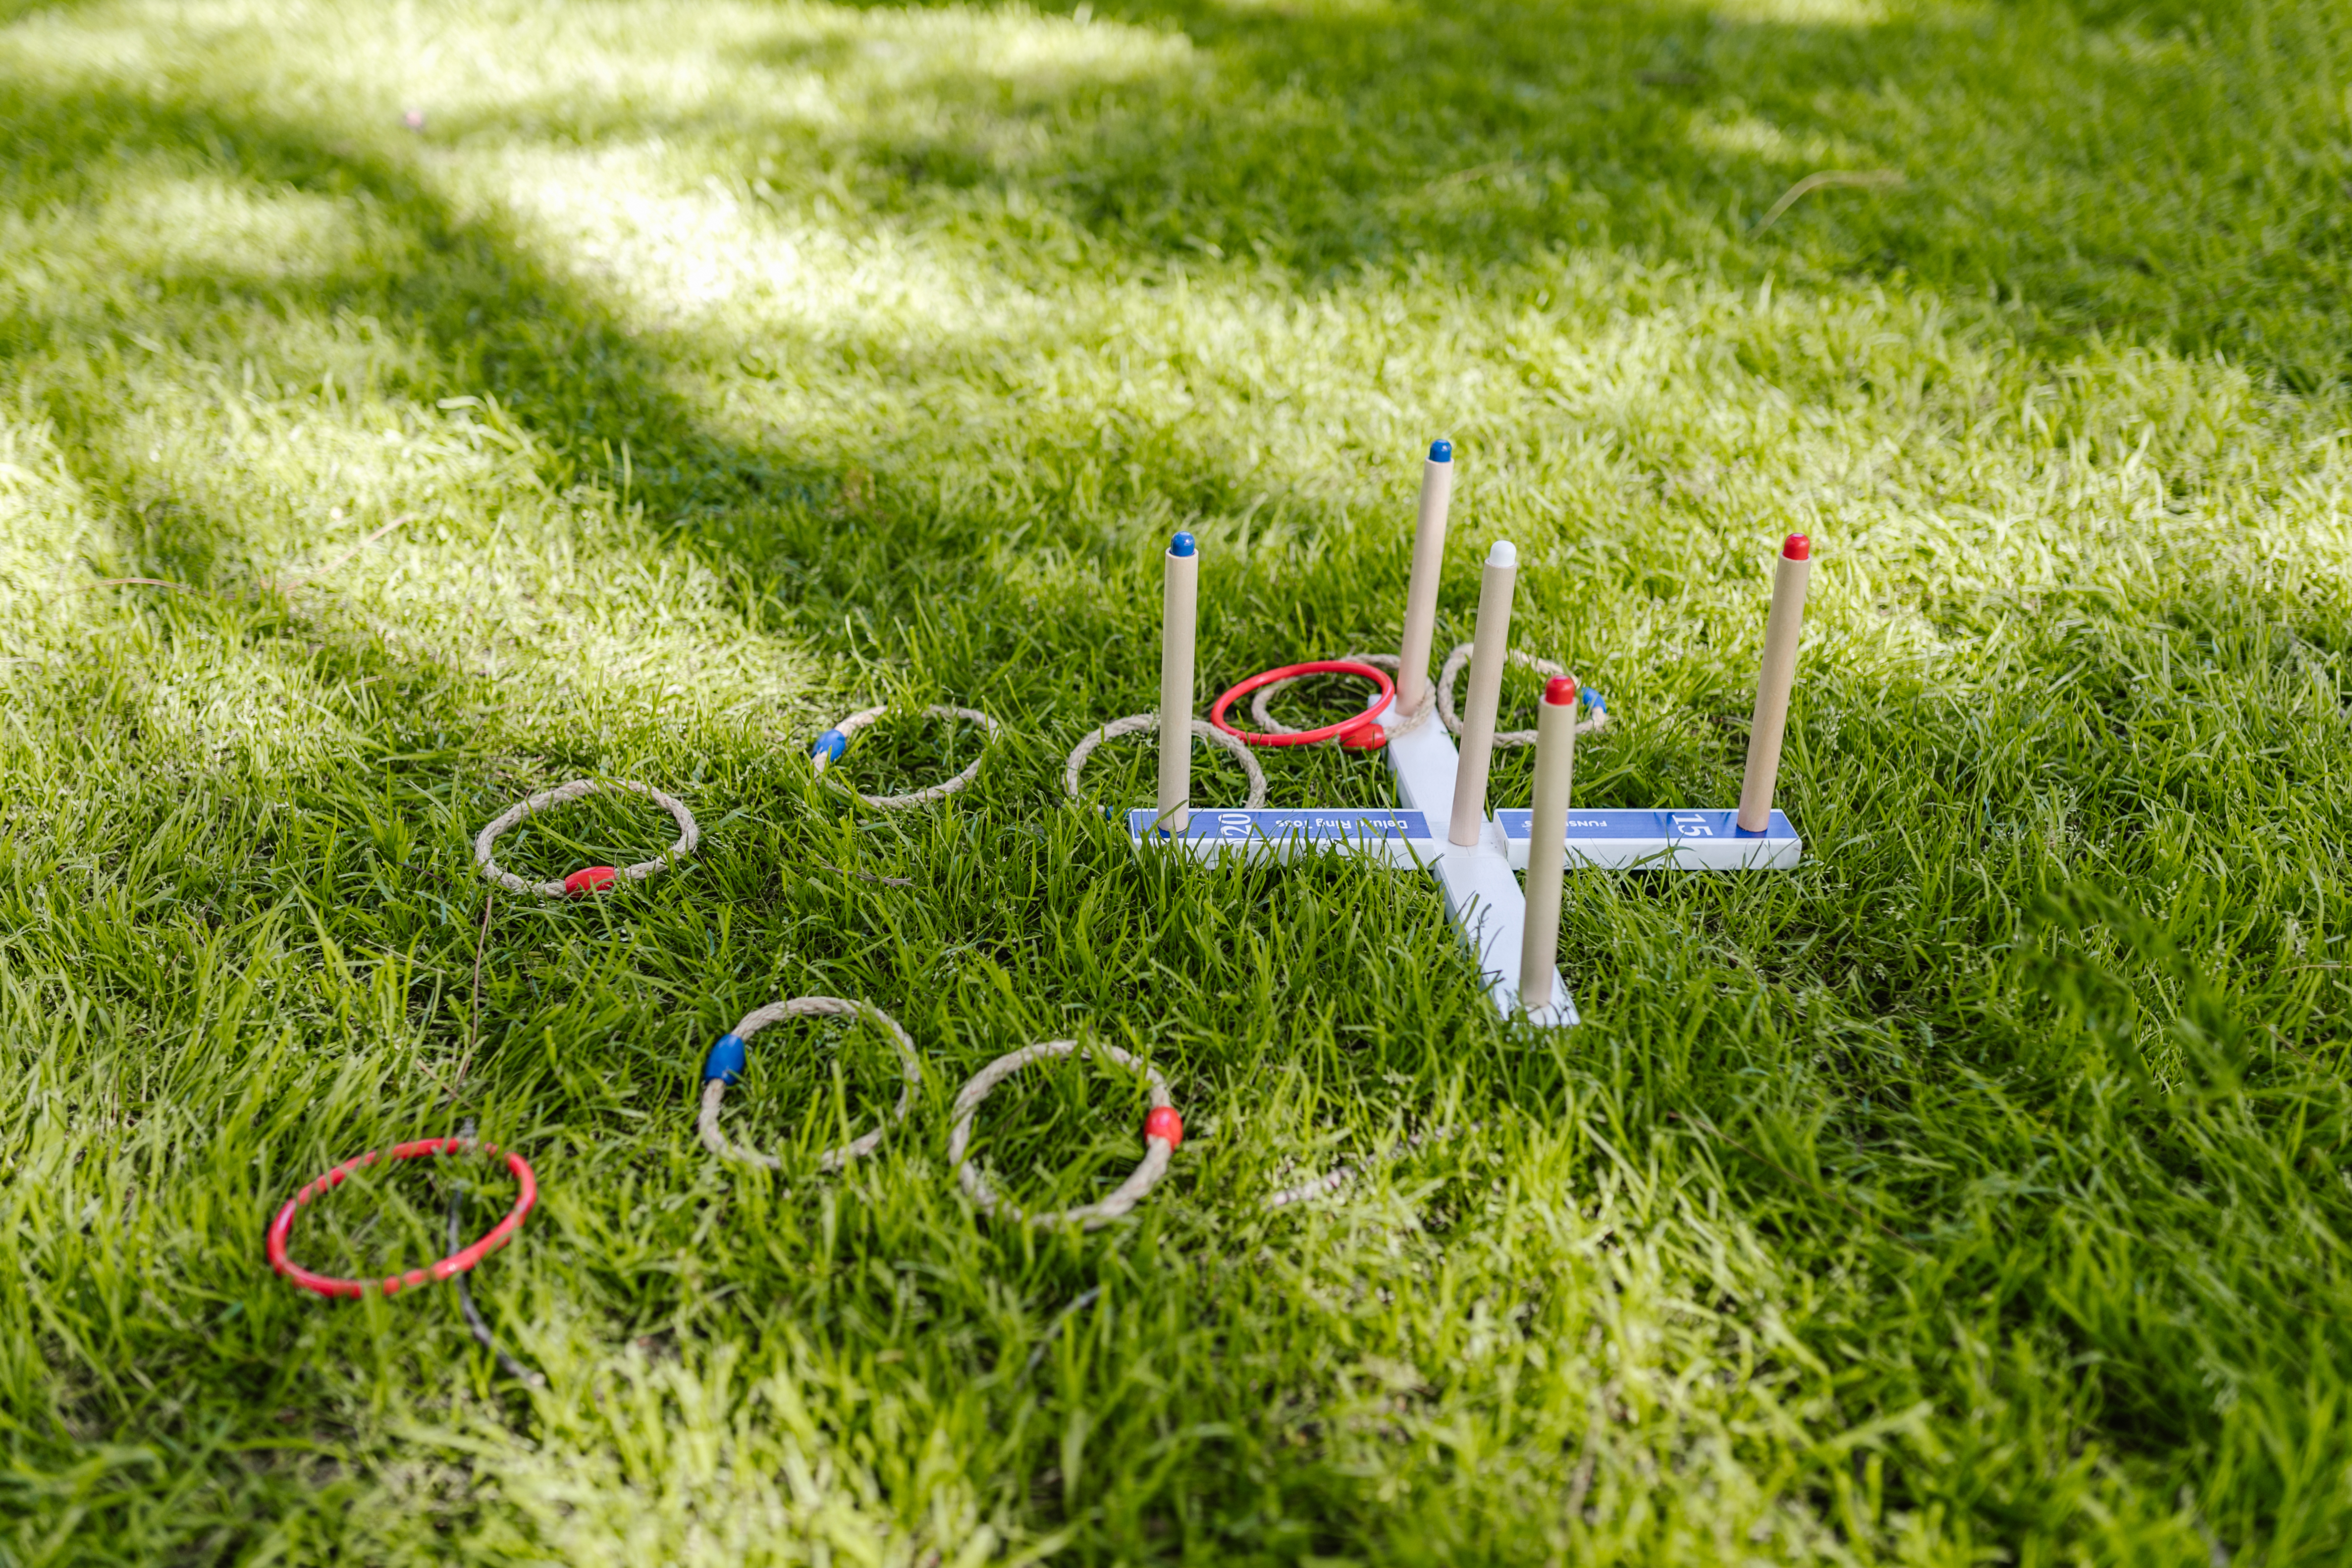 Ring toss on the lawn